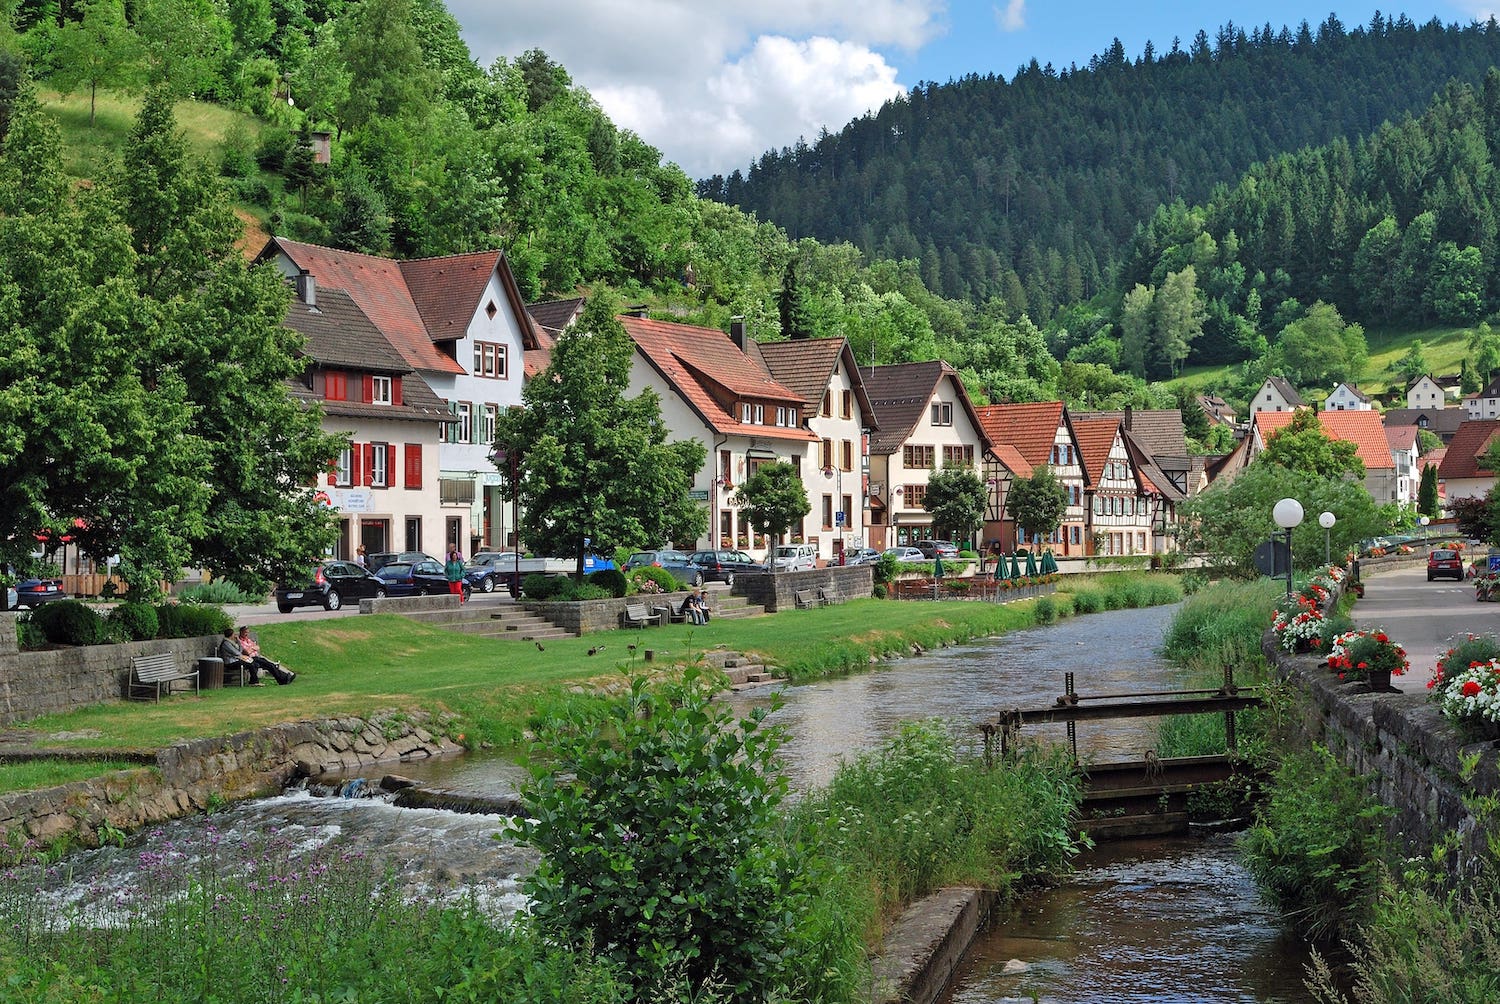 The river Schiltach in the village of Schiltach in the Black Forest in Germany.